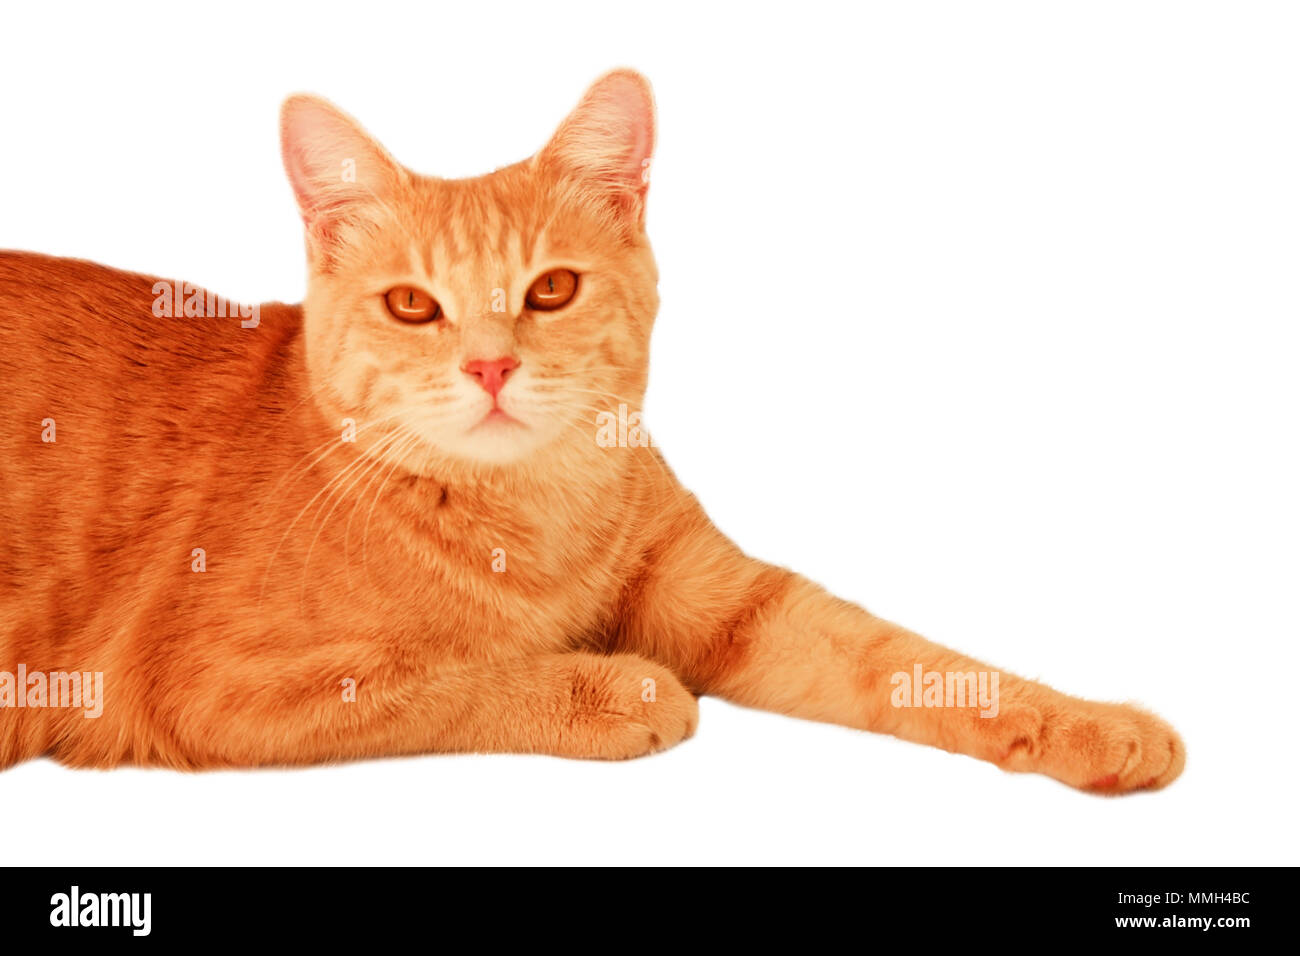 Portrait Of Red Haired Tabby Cat Isolated On White Background Stock Photo Alamy